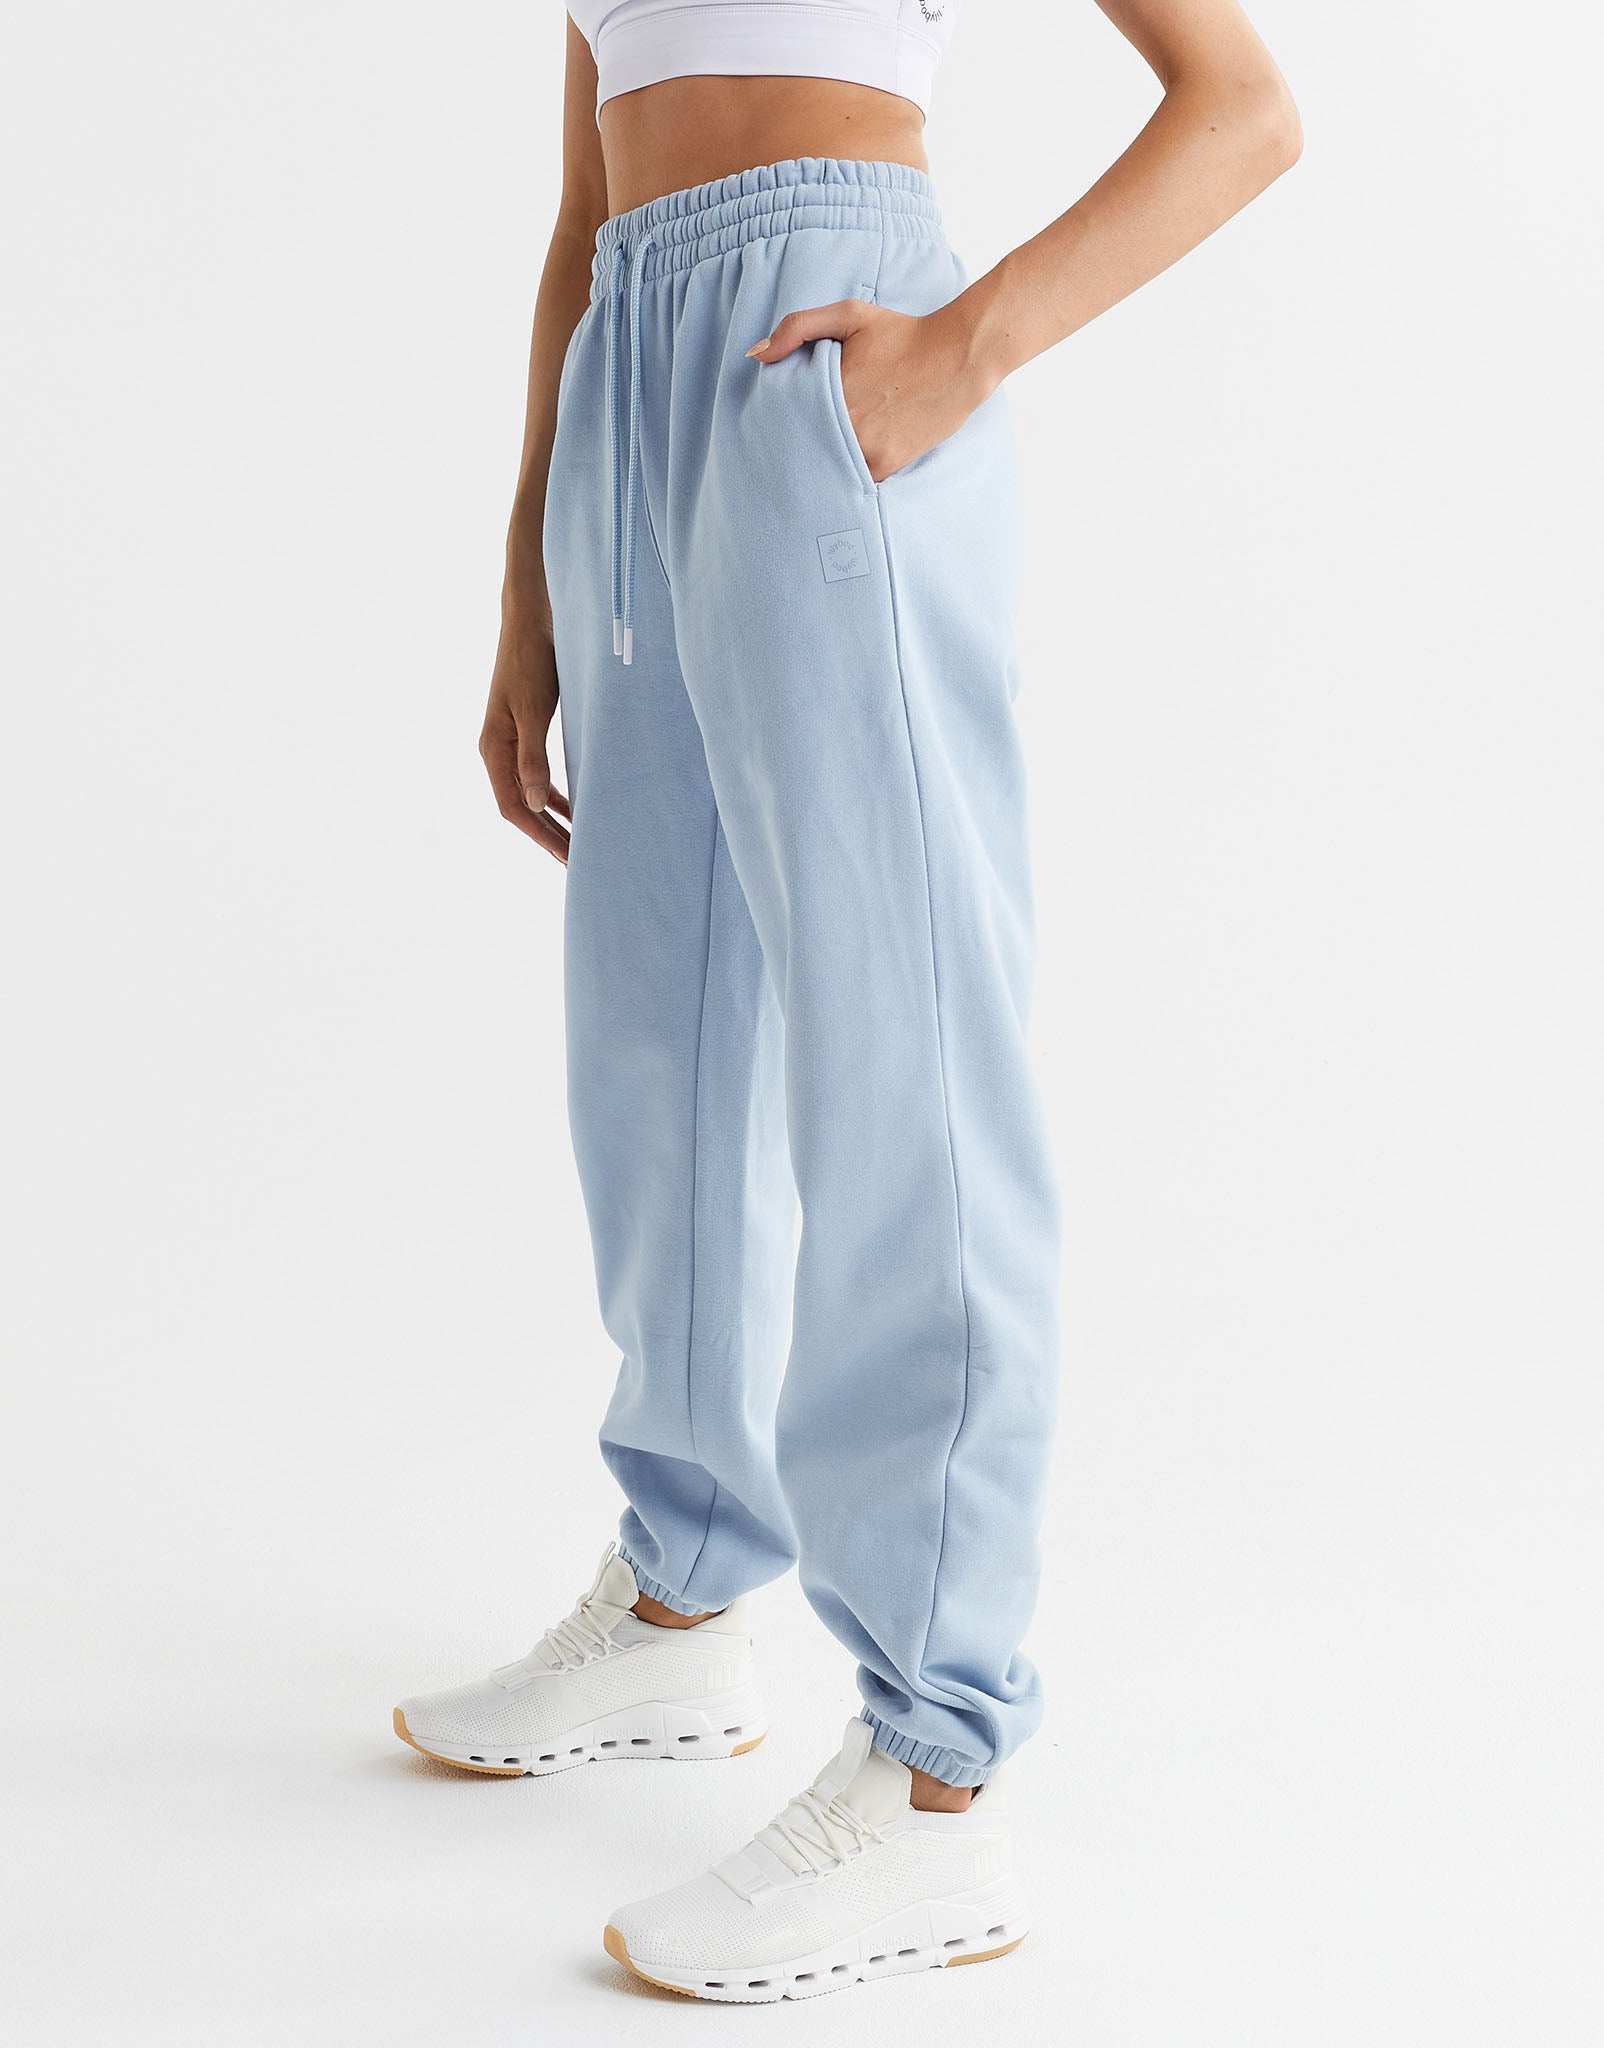 Lilybod-Lucy-Oversized-Fleece-Track-Pant-Cloud-LL89-CLD-3-New.jpeg